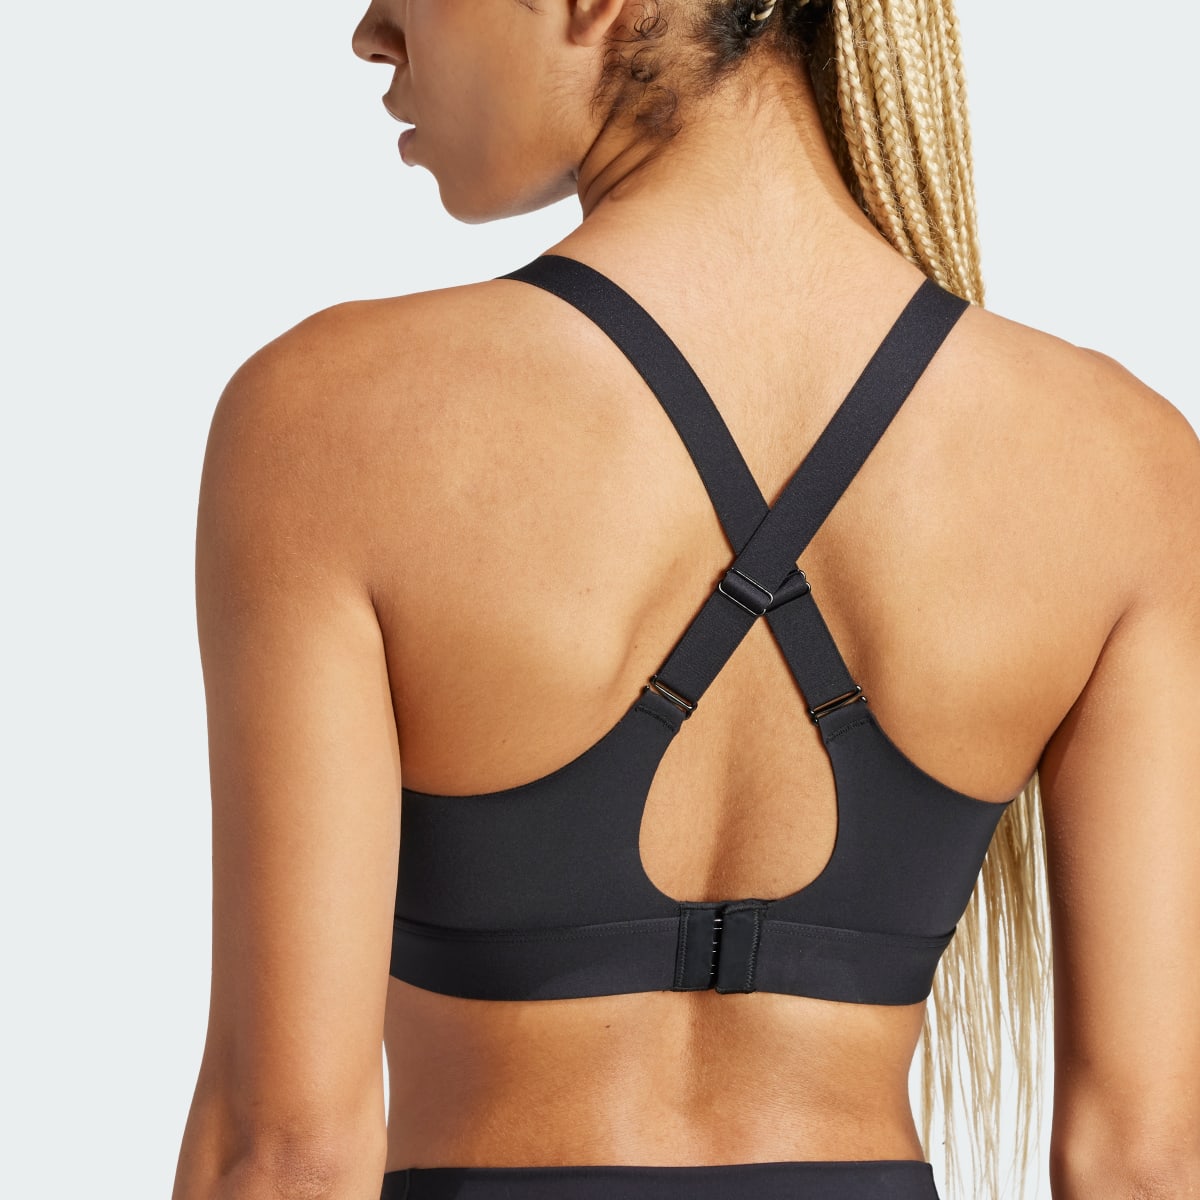 Adidas Brassière de training TLRD Impact Luxe Maintien fort. 7